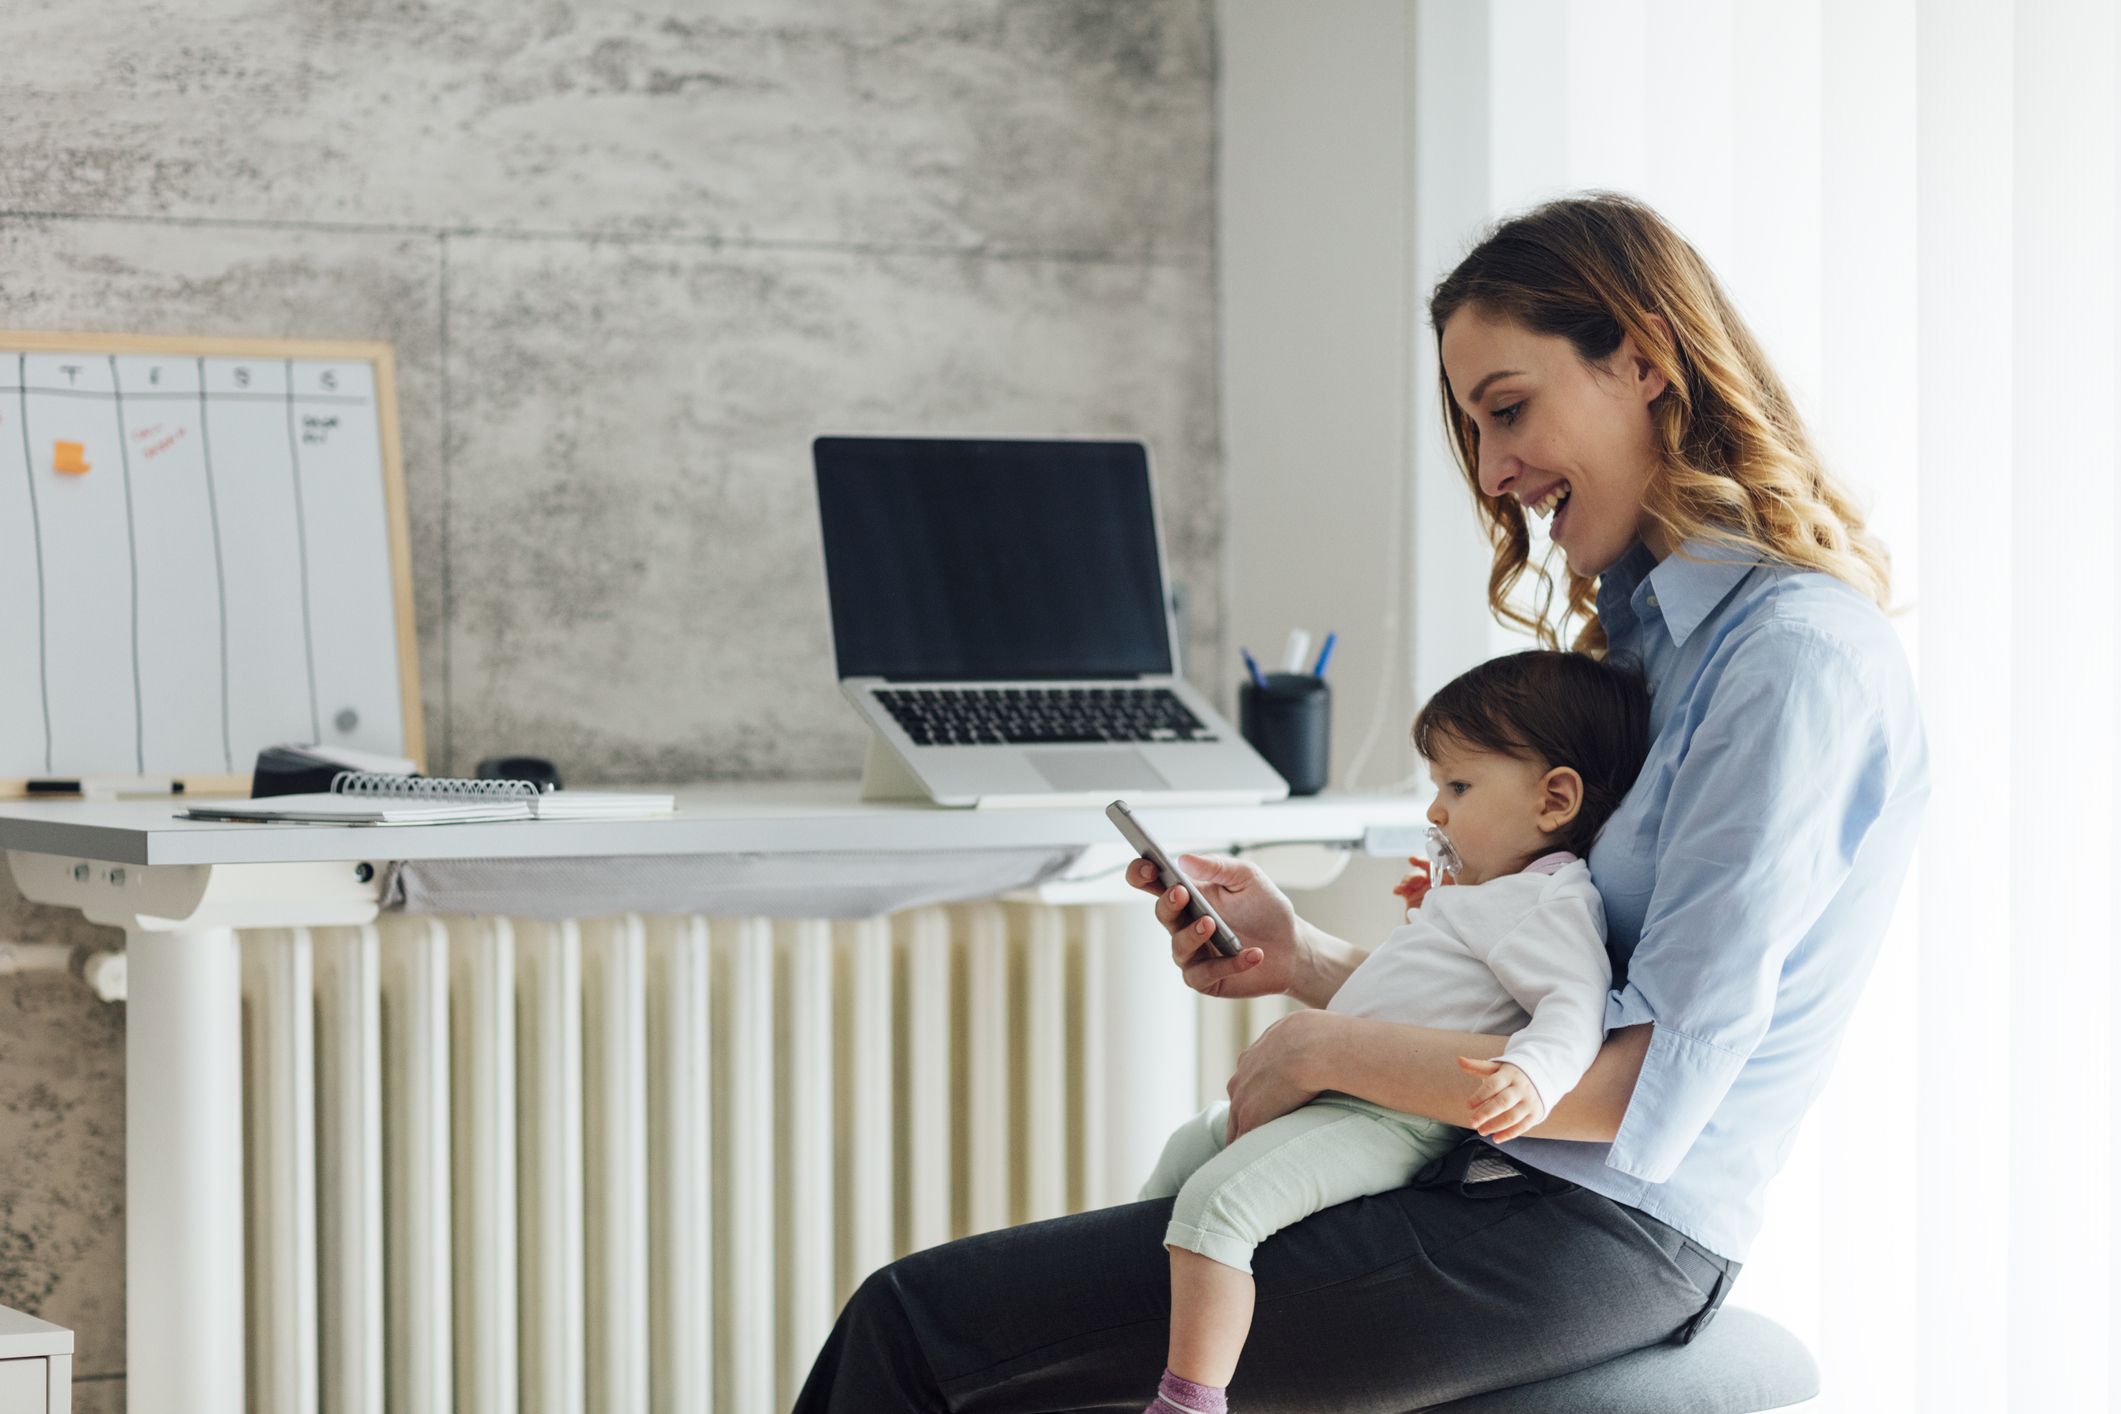 How can I work from home with a newborn